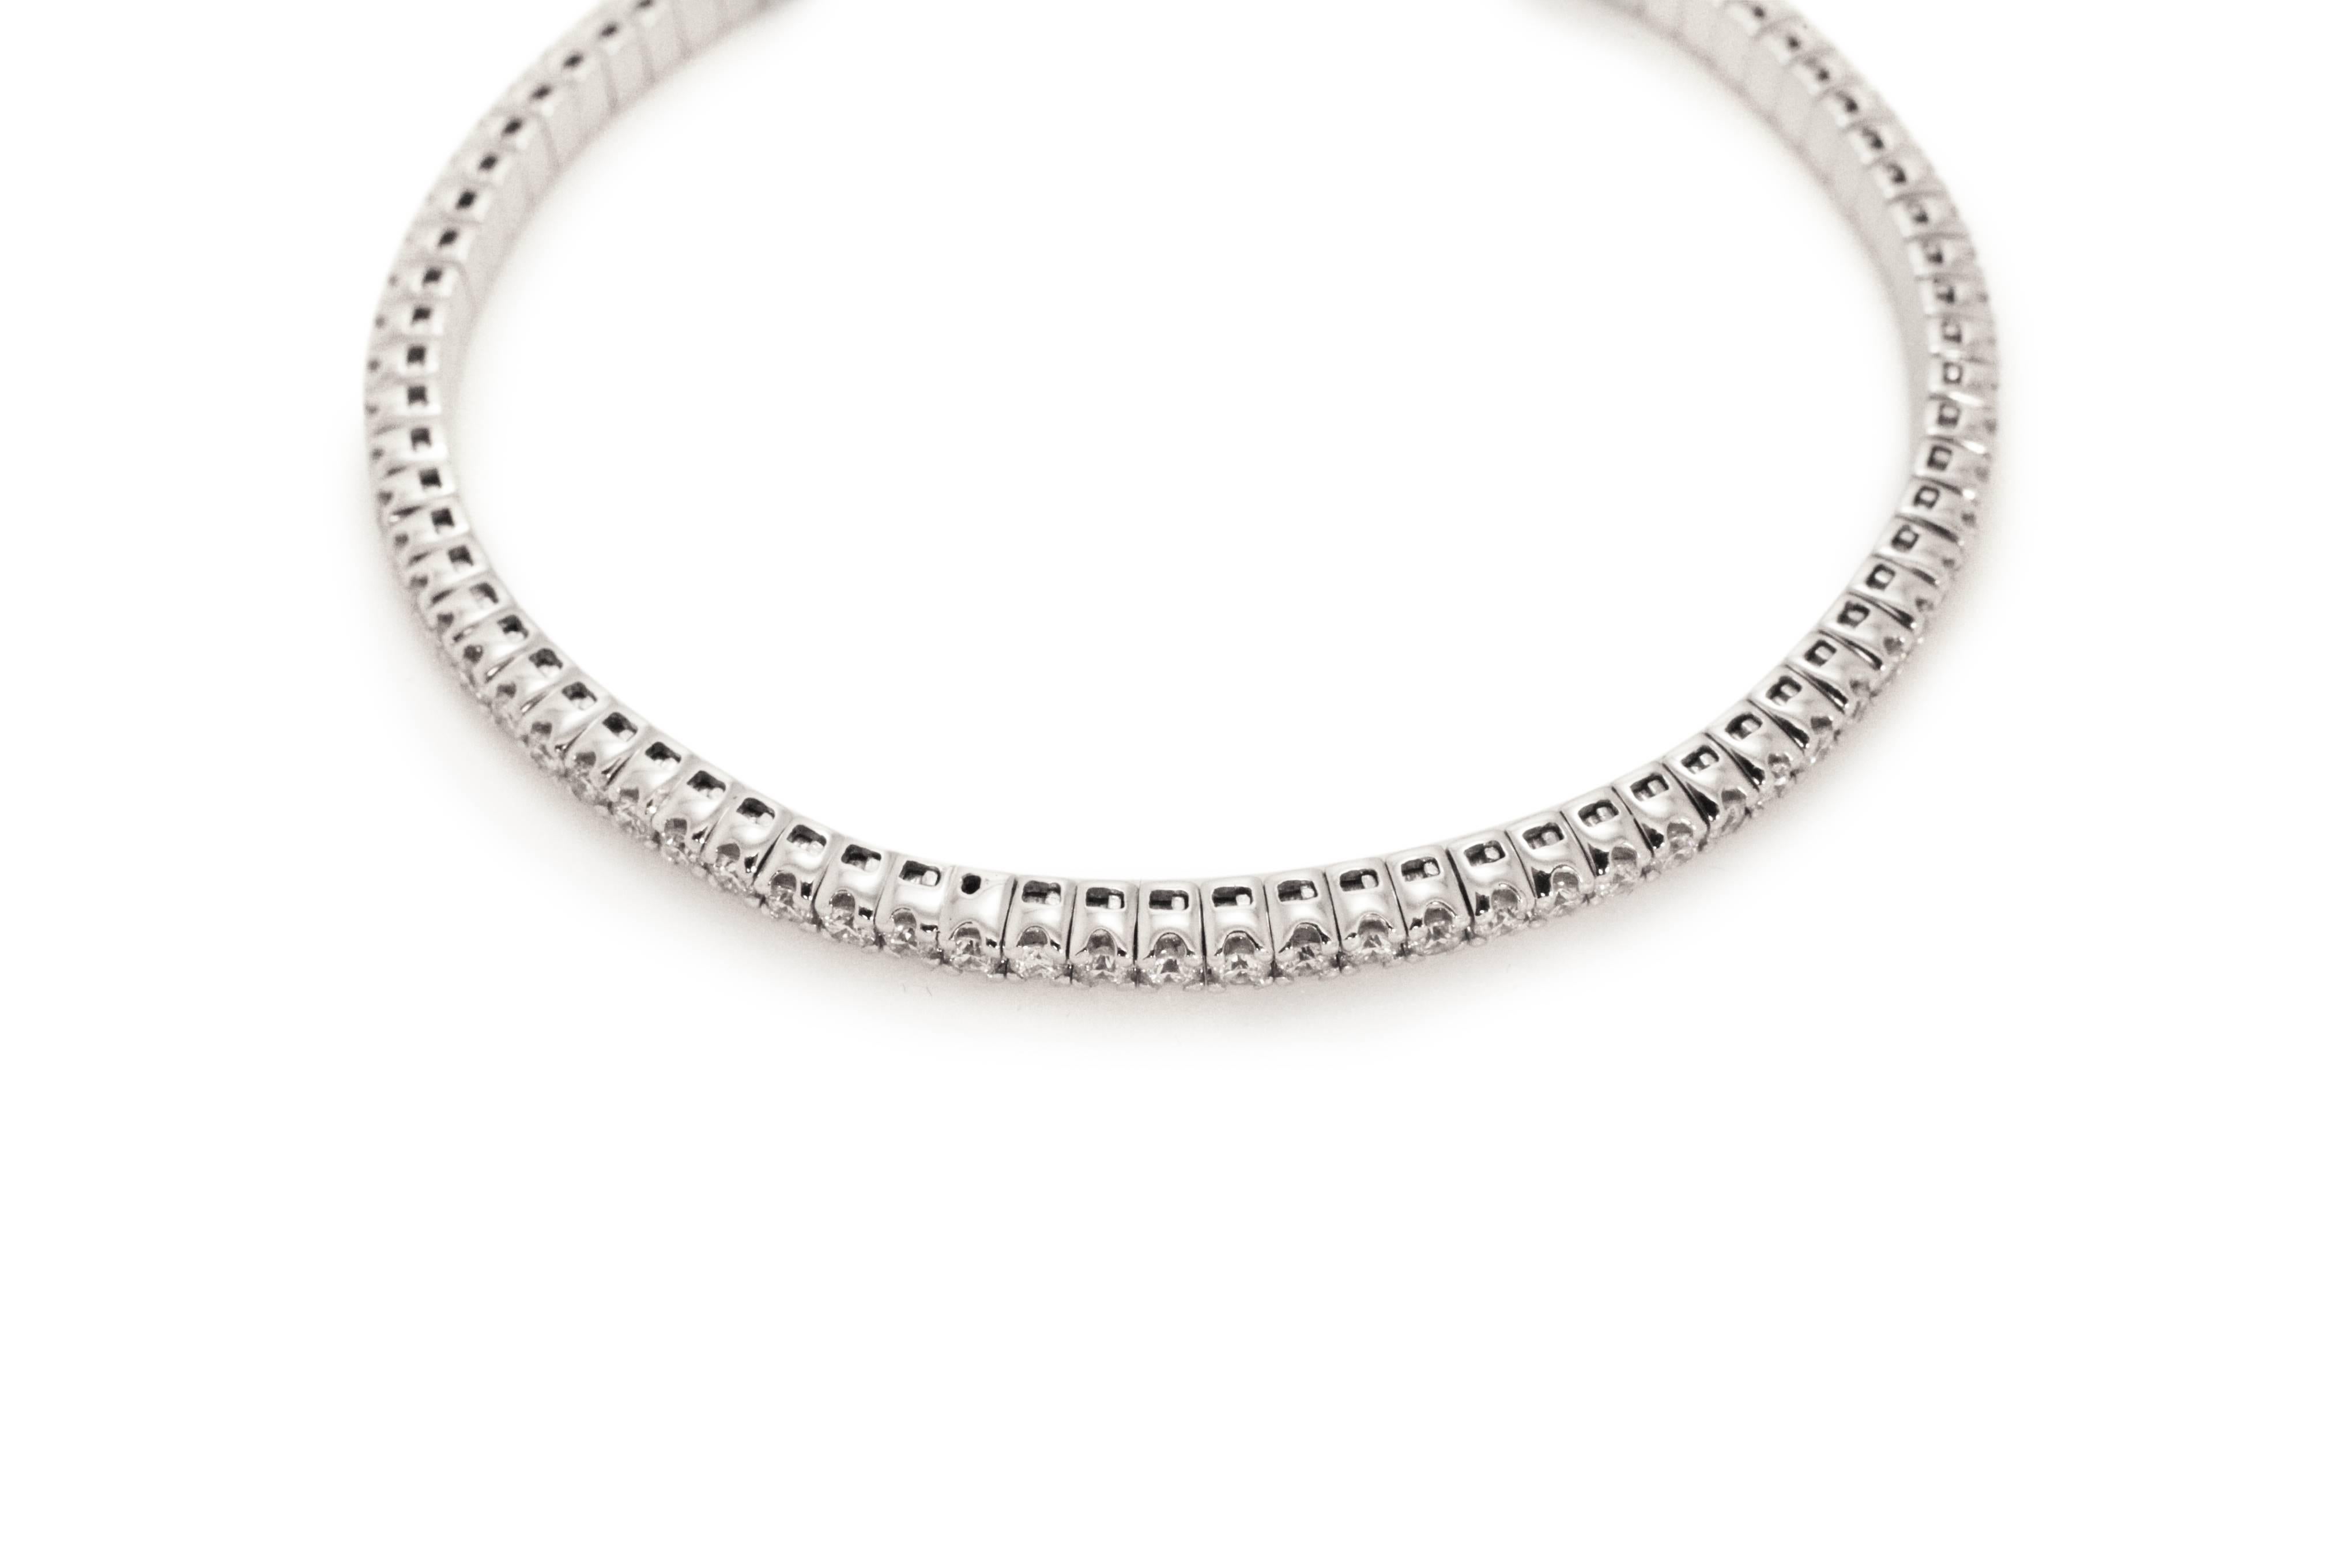 Ferrucci 2.20 carats G color Elastic Eternity Diamond Tennis bracelet, entirely made in 18k Italian white gold, made in Valenza Italy, famous jewelry city for many generations, exporting the Jewelry Made in Italy in the world. 
This truly unique